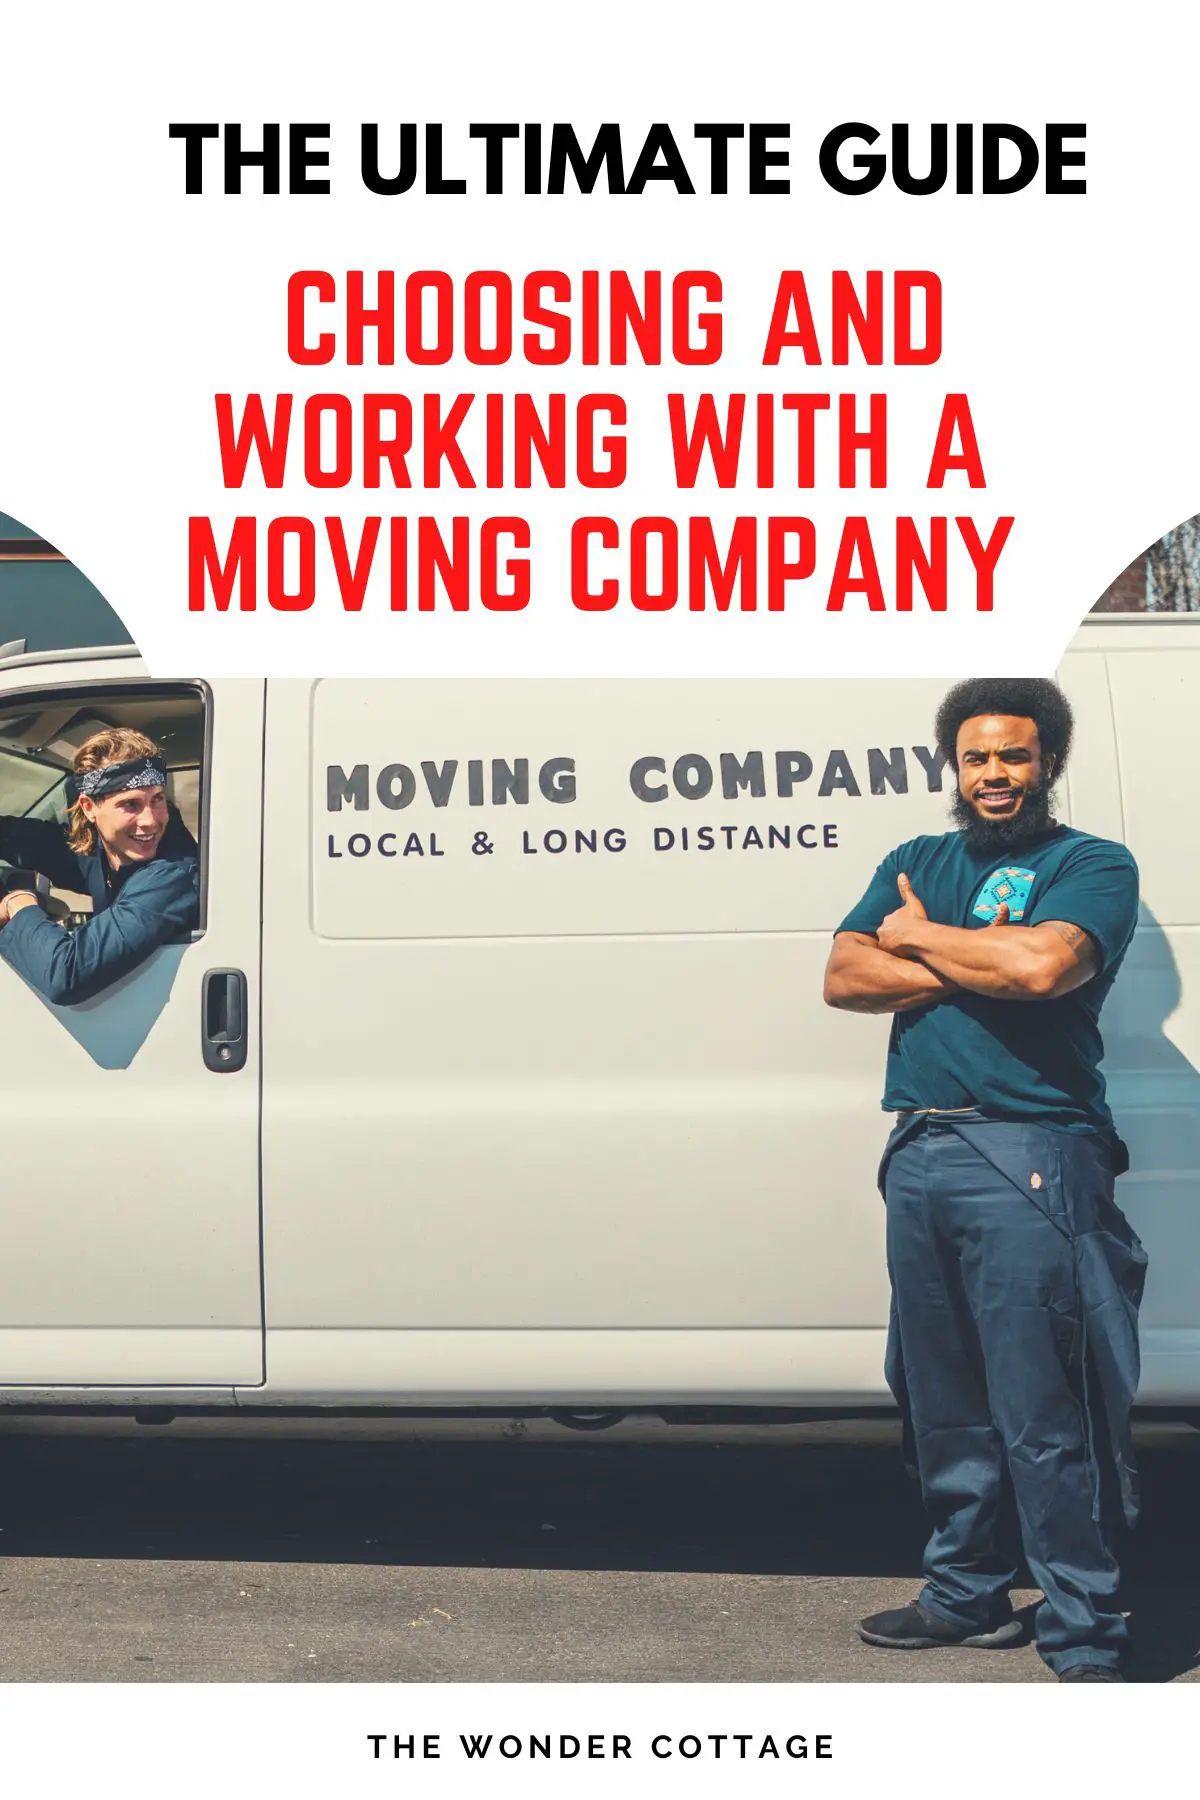 The Ultimate Guide To Choosing And Working With A Moving Company!